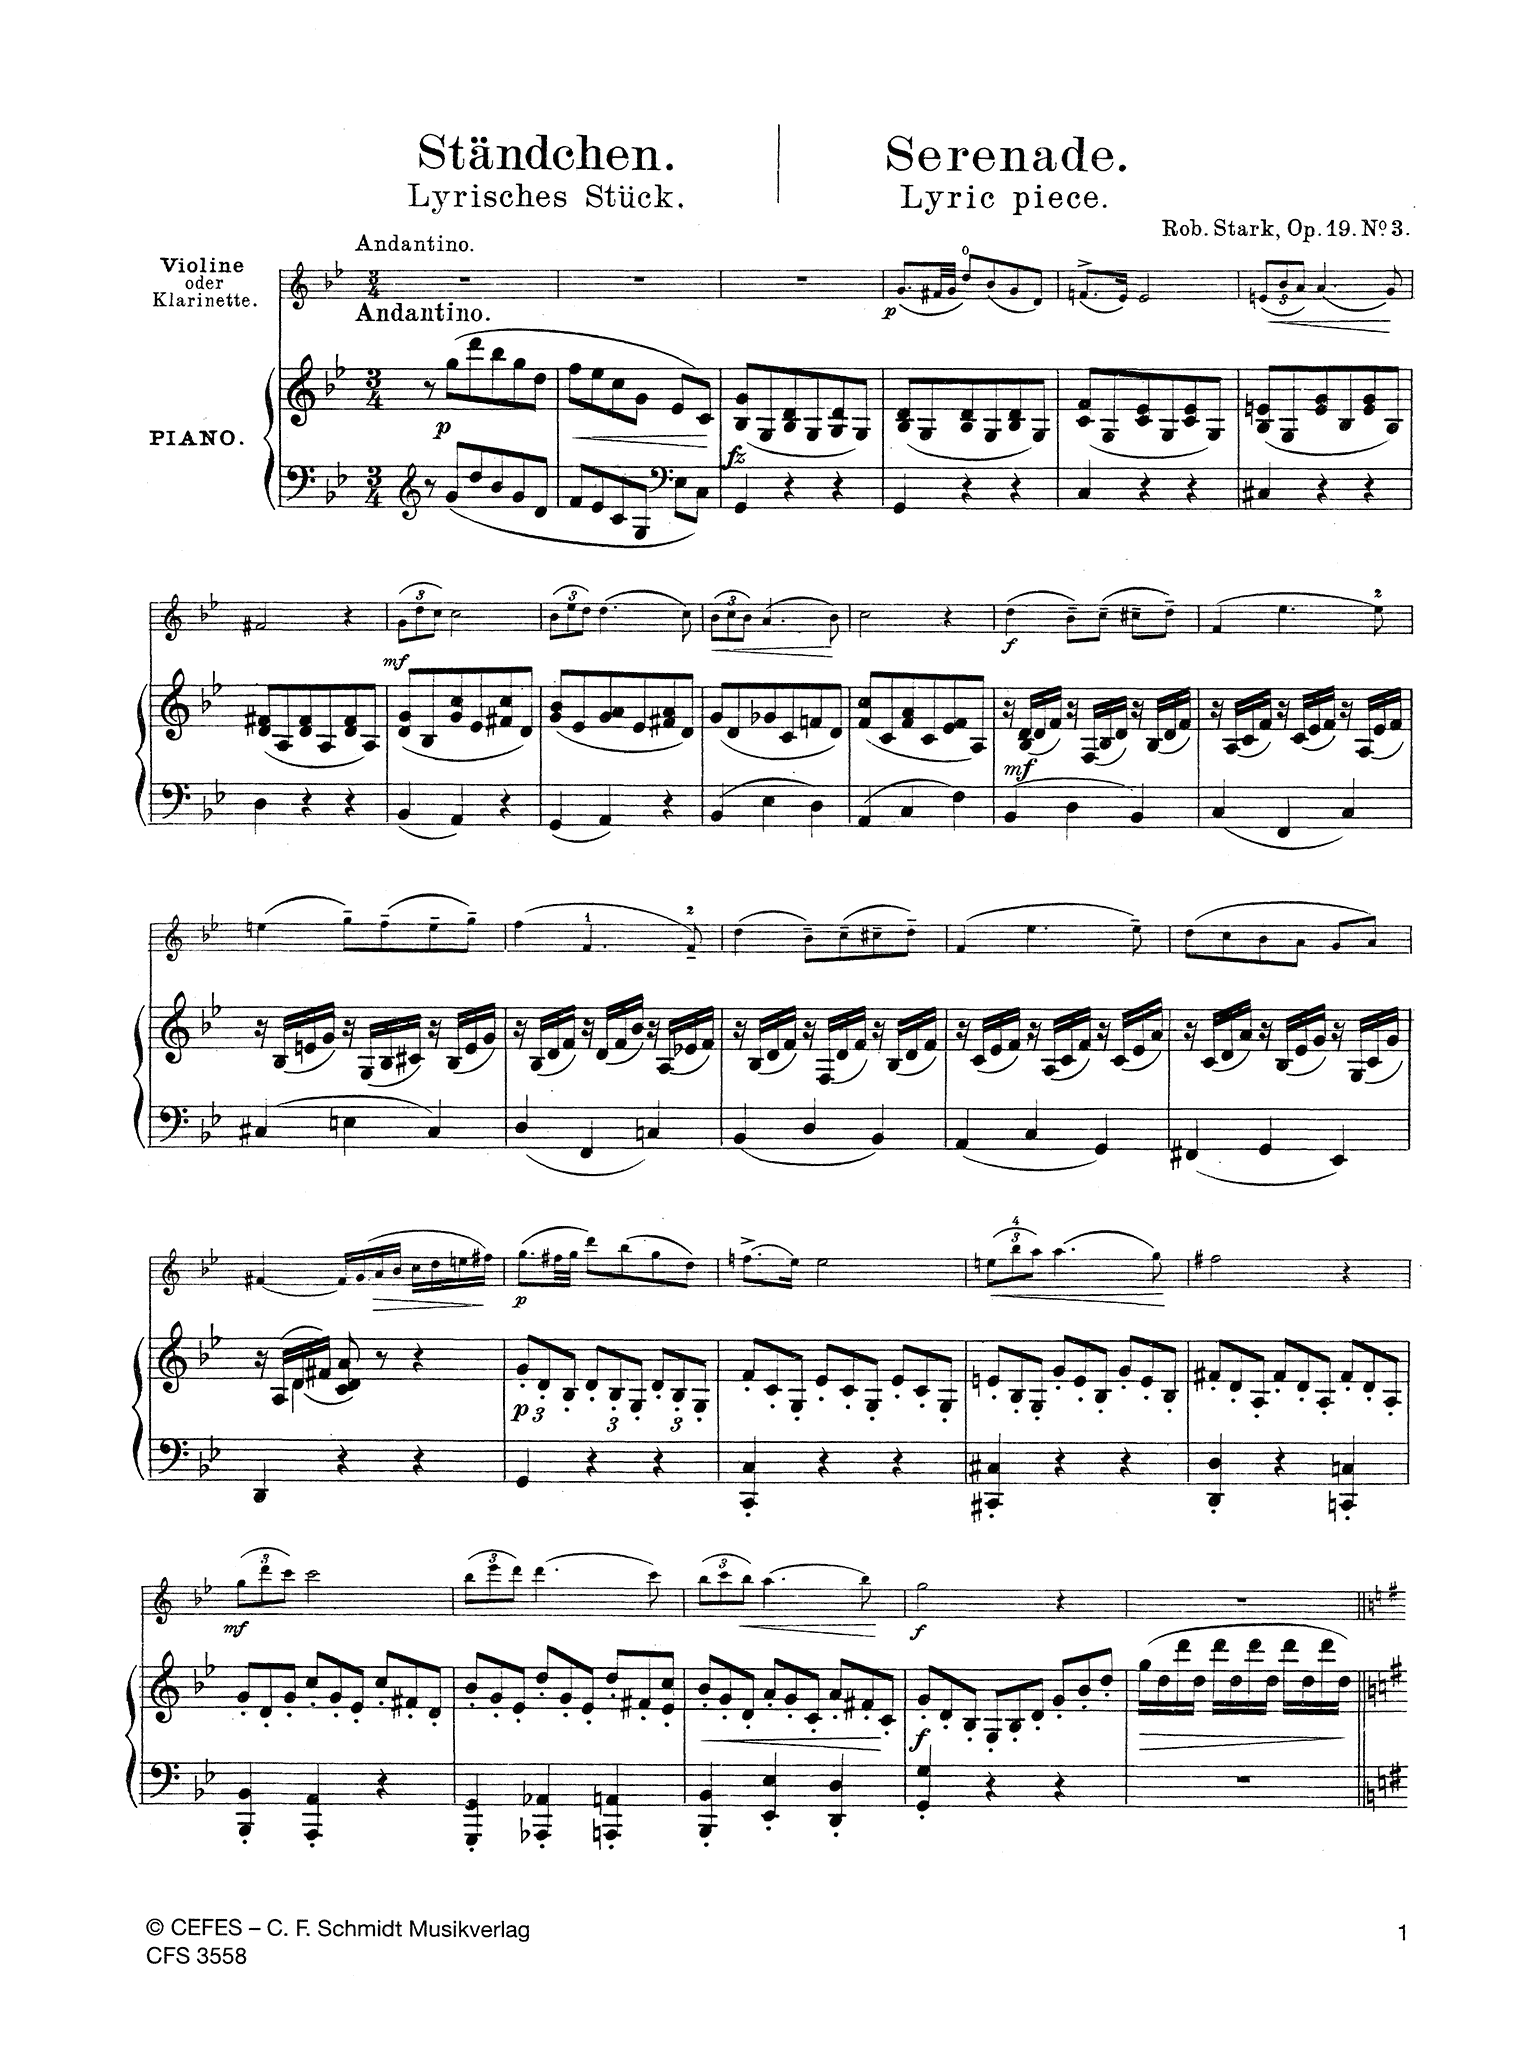 Stark Lyric Pieces, Op. 19 Nos. 3 & 4 clarinet and piano Standchen